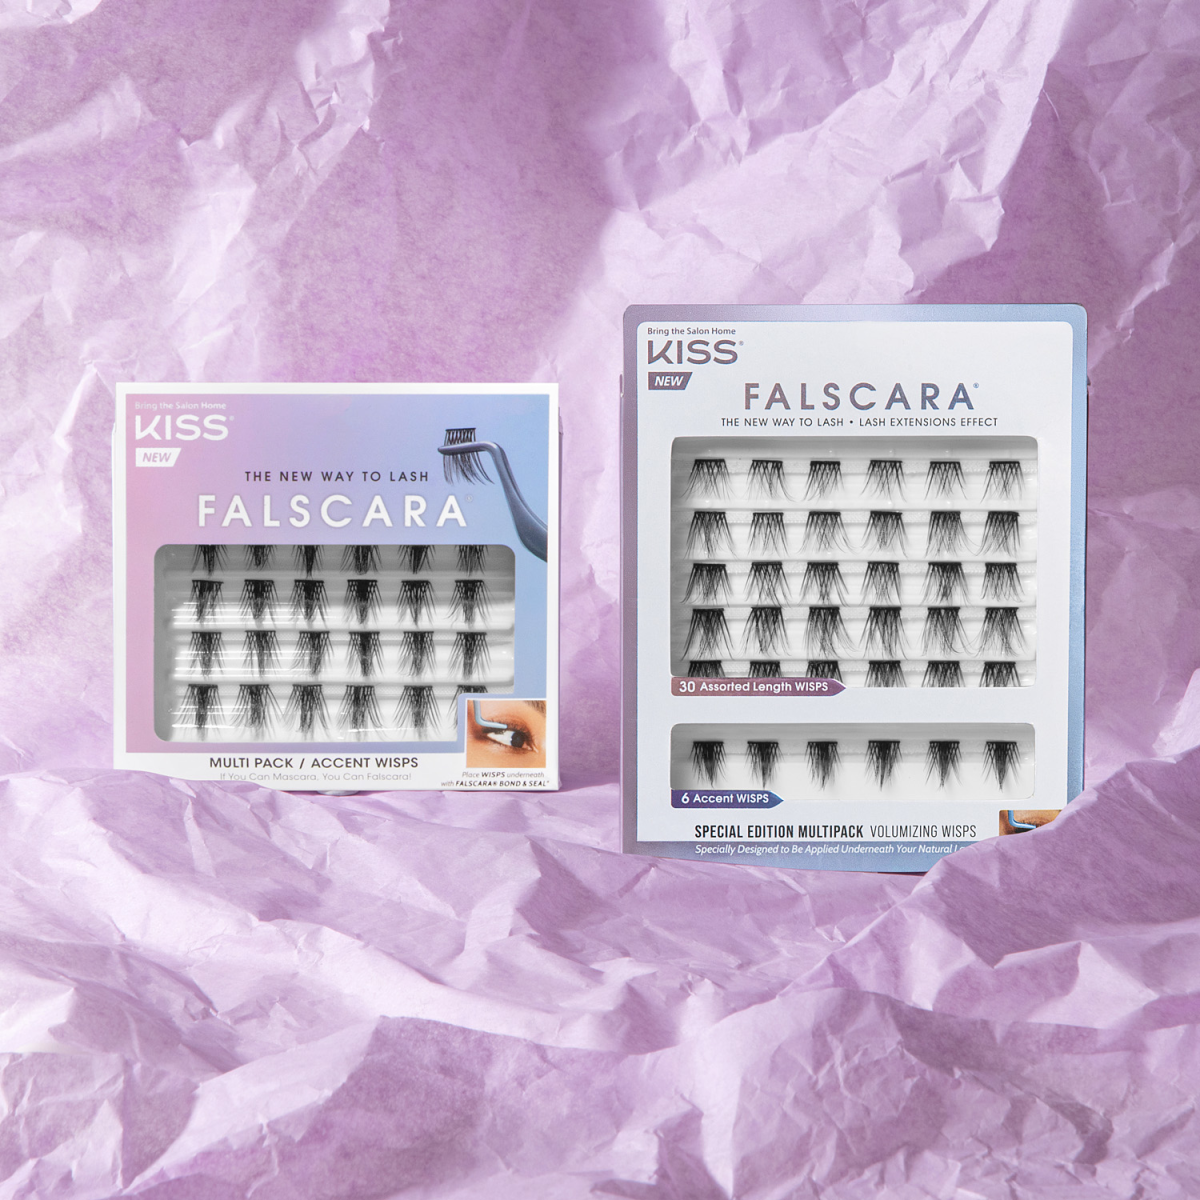 FALSCARA Special Edition Multipack with Accents - Volumizing